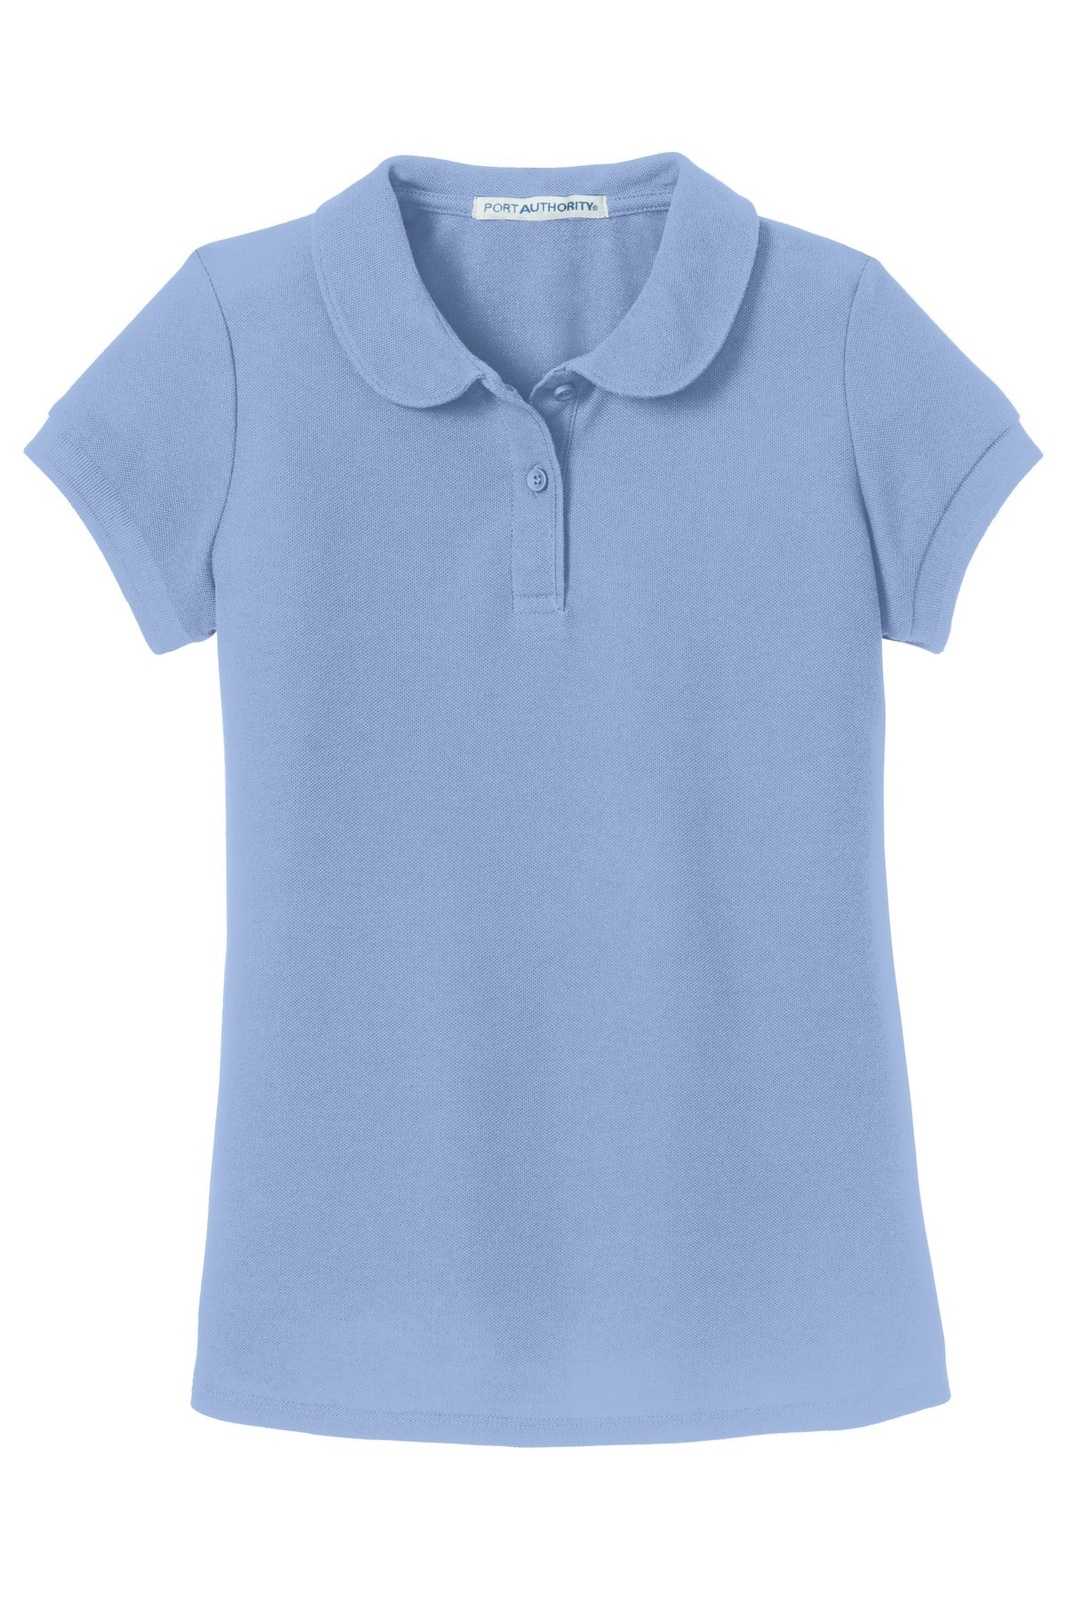 Port Authority YG503 Girls Silk Touch Peter Pan Collar Polo - Light Blue - HIT a Double - 5